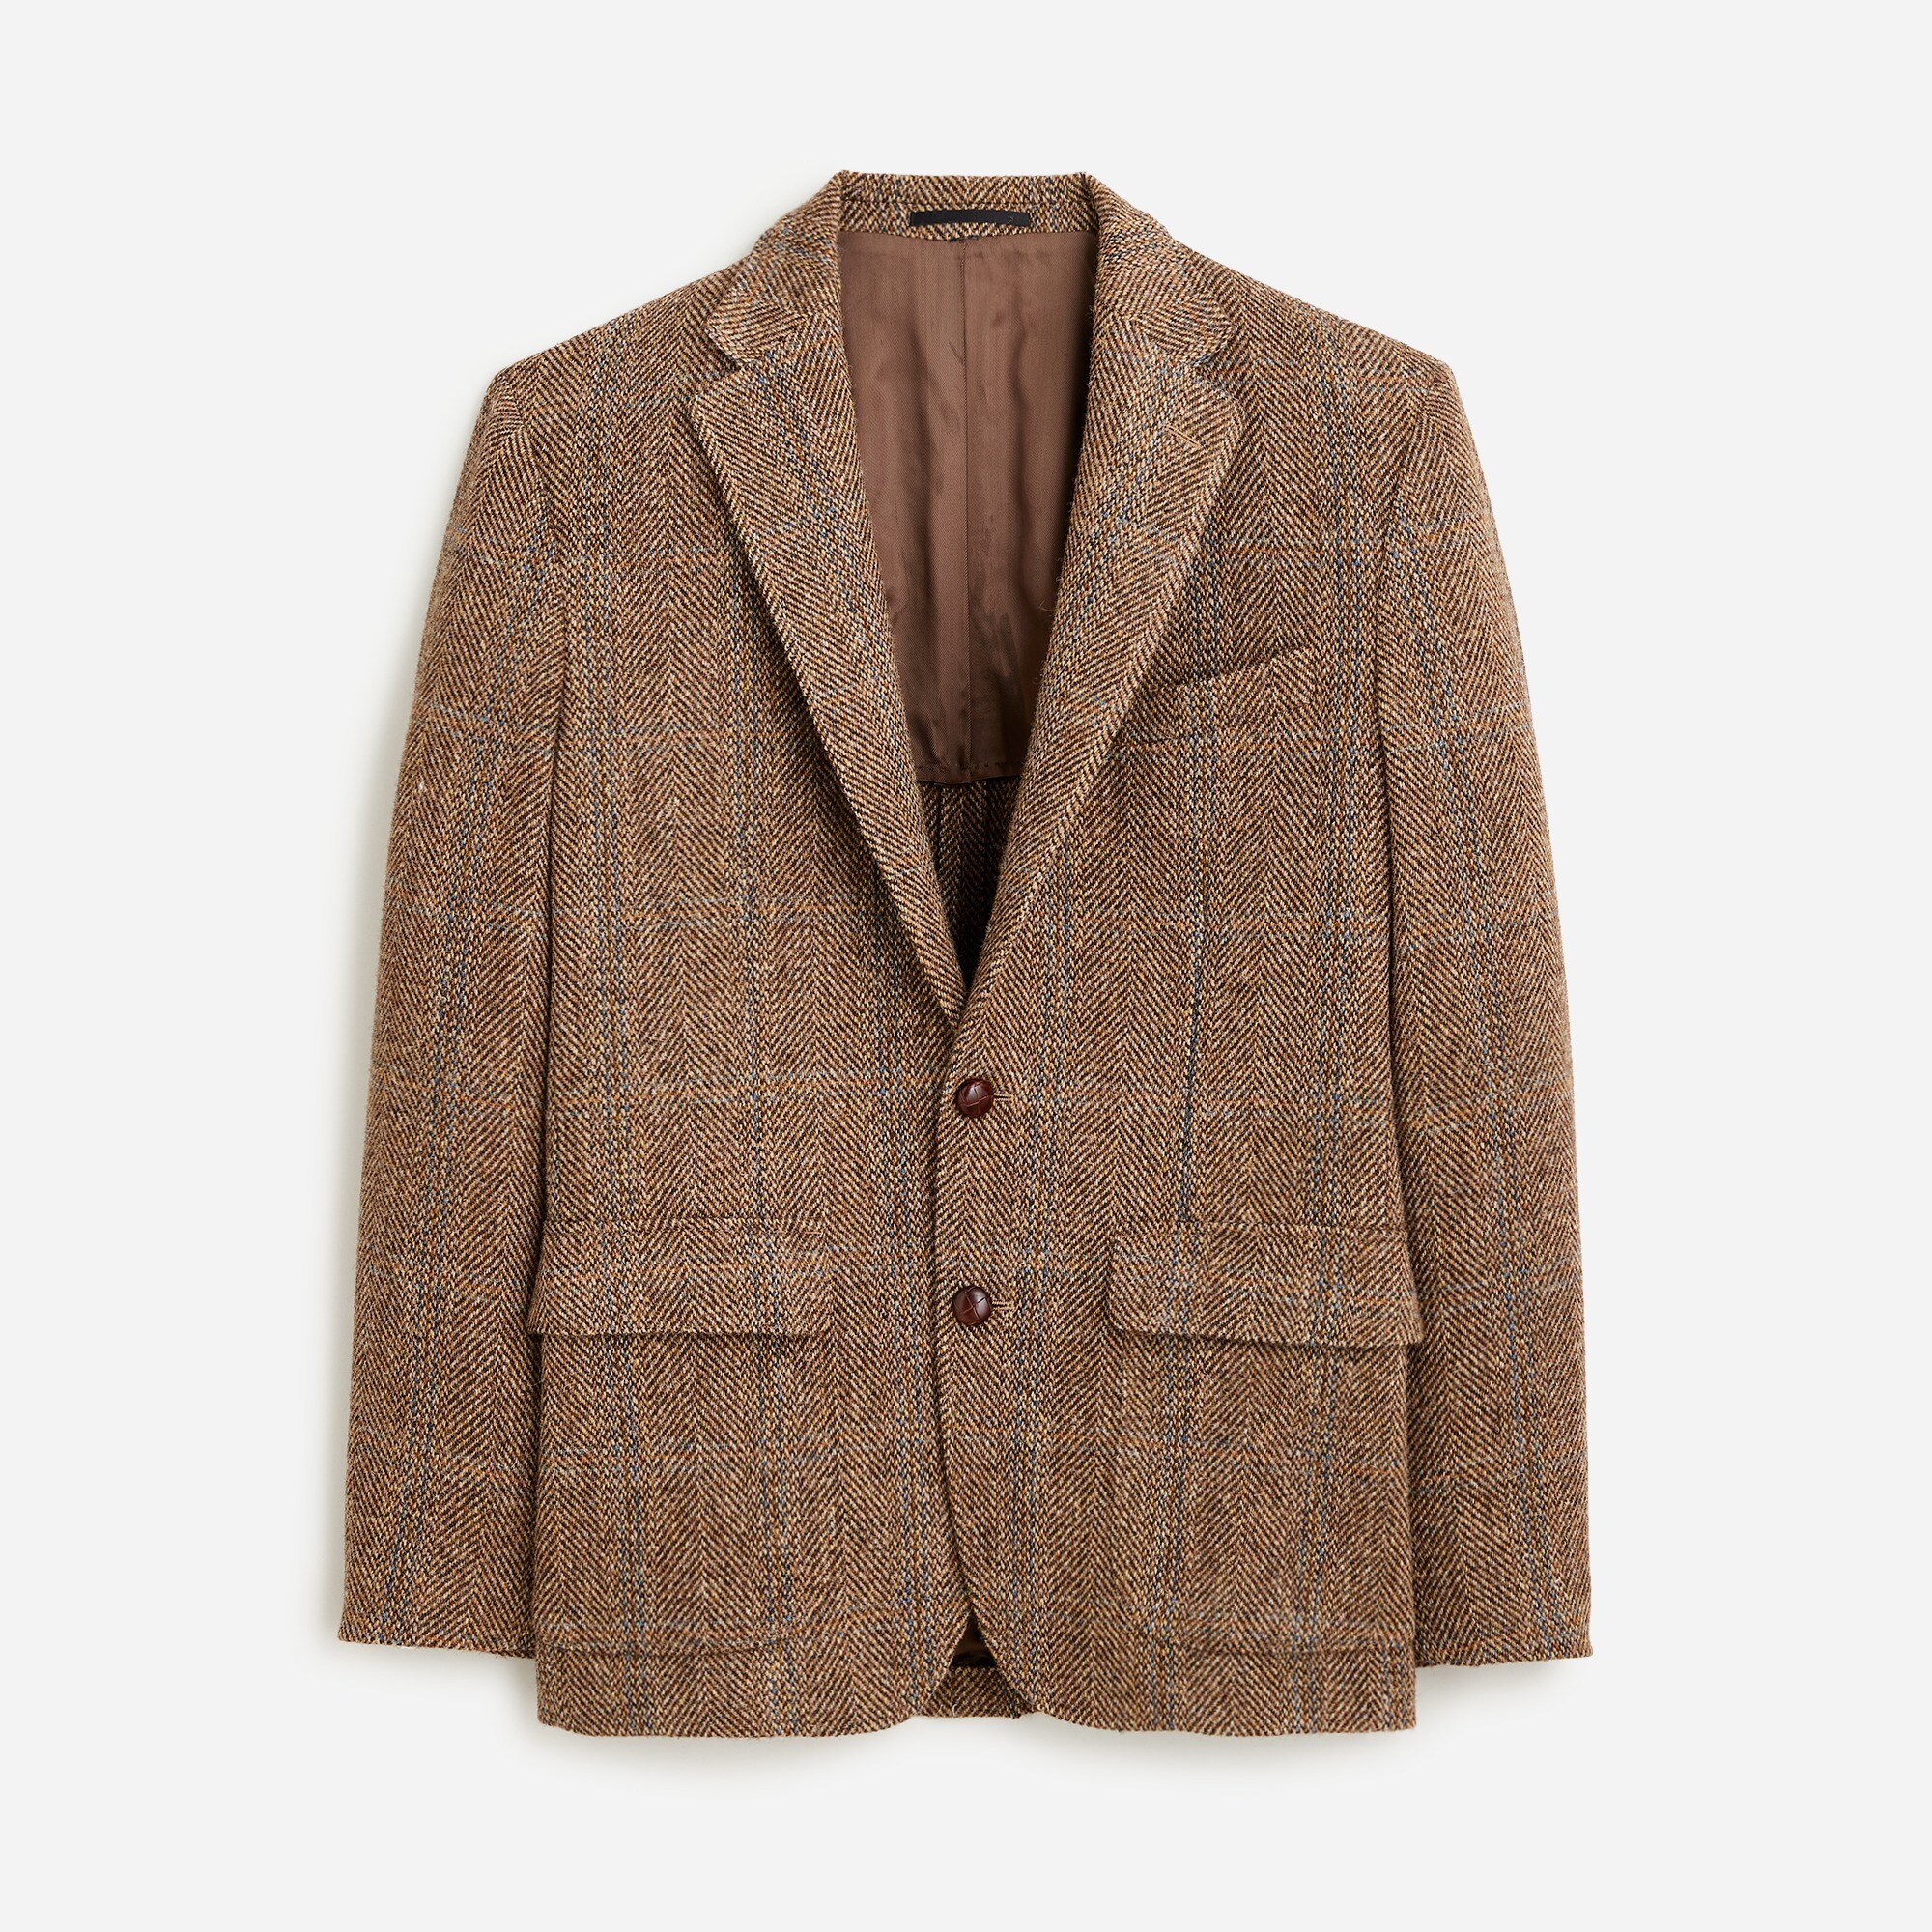  Limited-edition Crosby Classic-fit blazer in Scottish wool